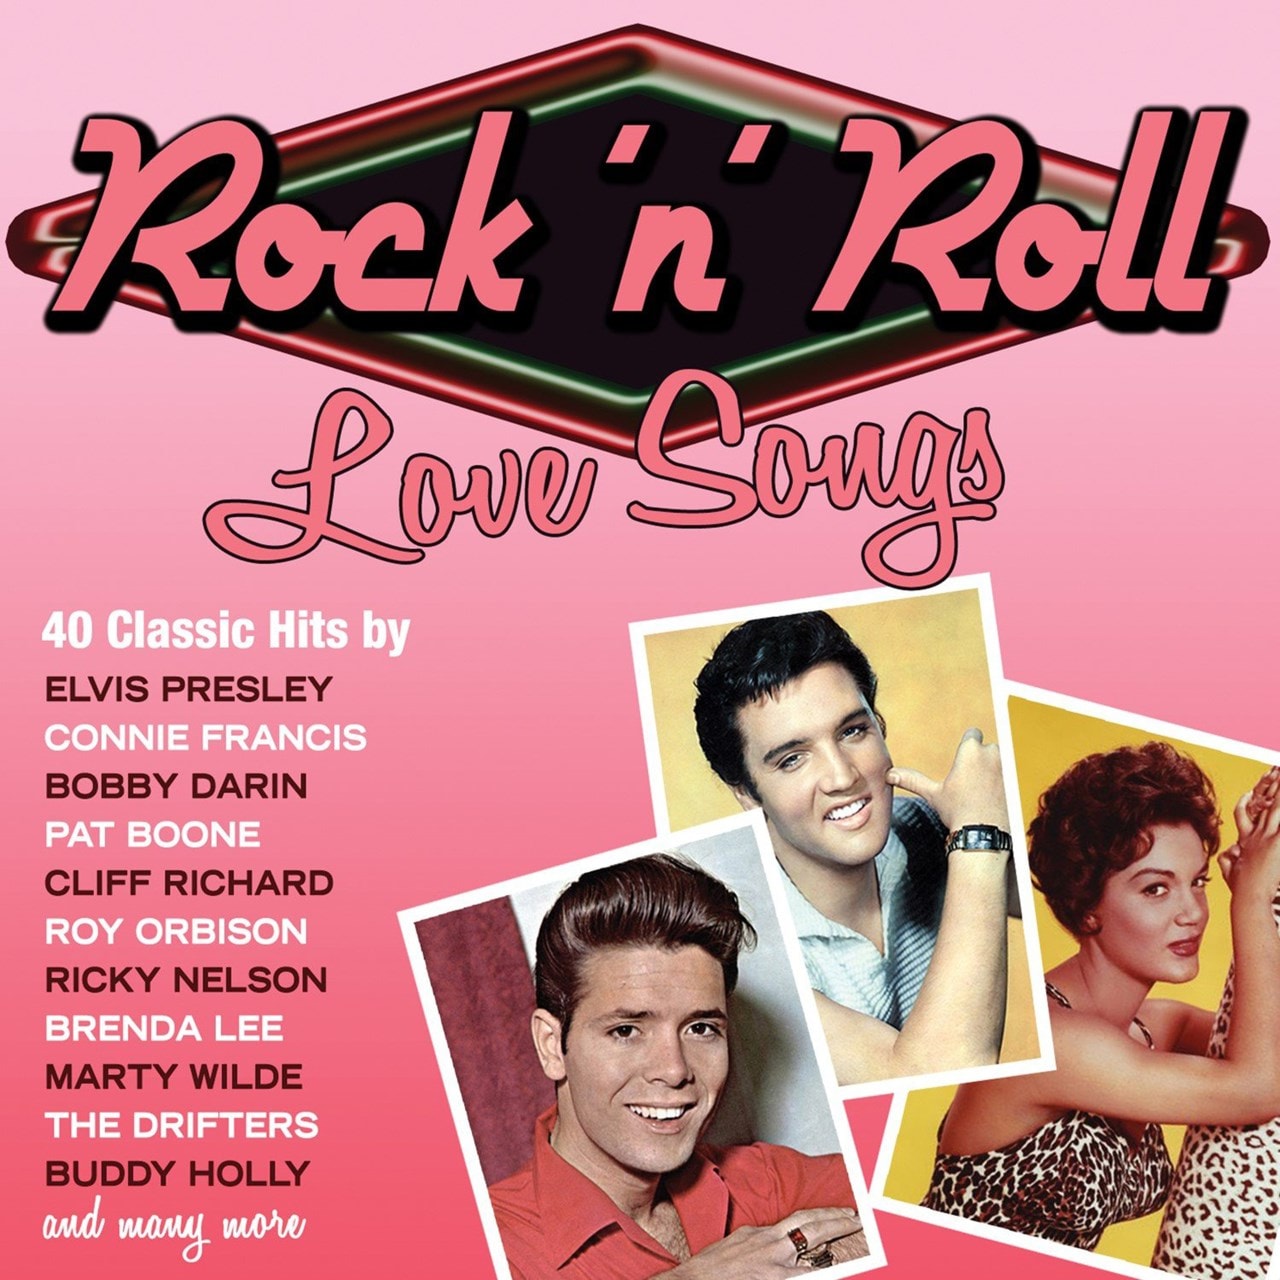 Rock 'N' Roll Love Songs | CD Album | Free shipping over £ ...